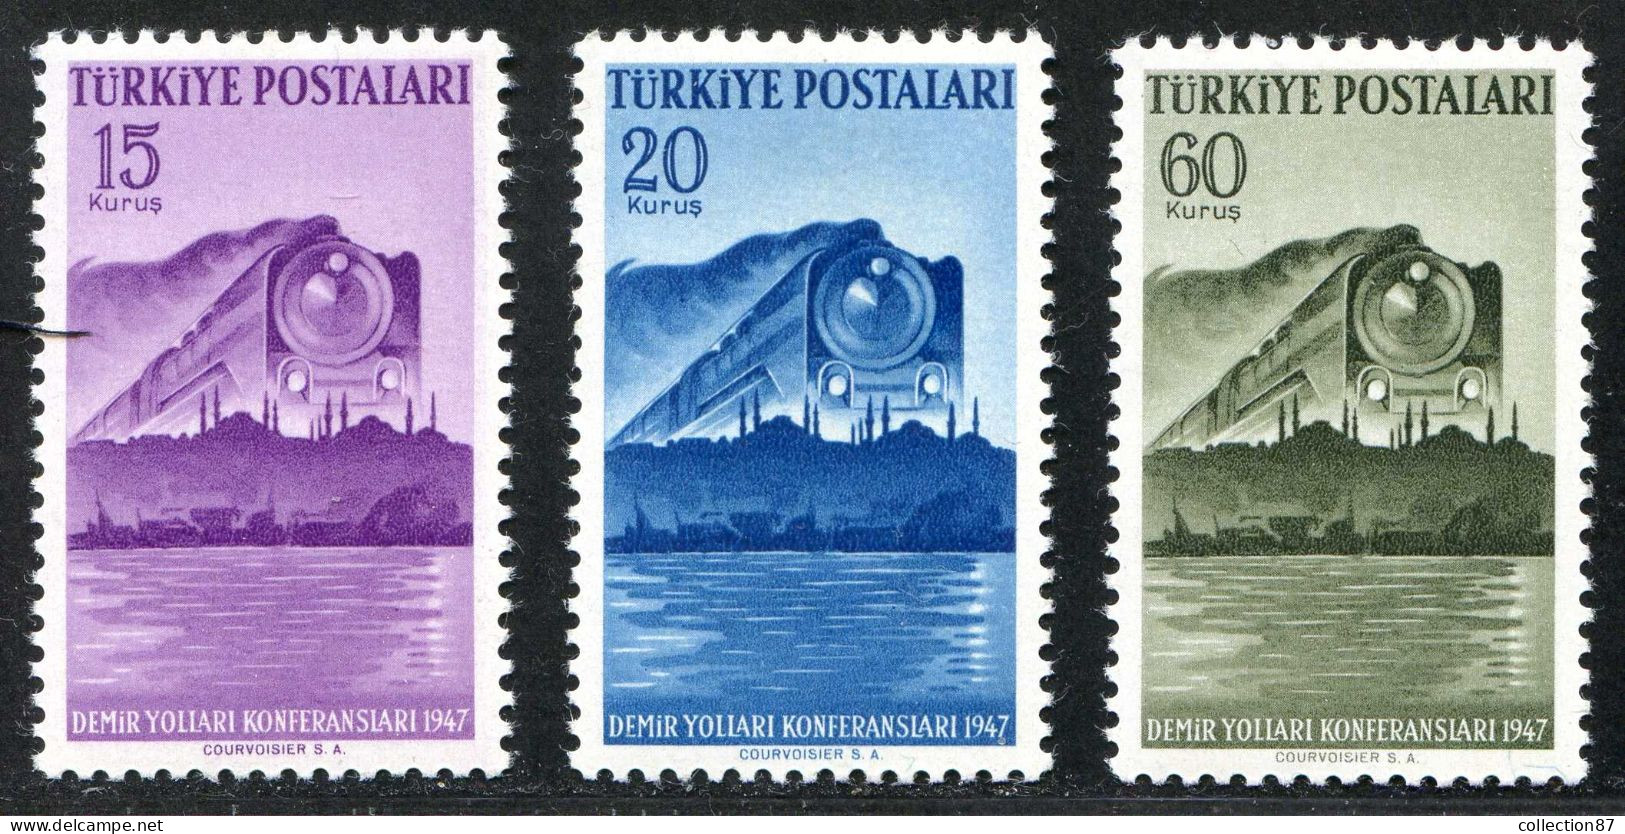 REF 091 > TURQUIE < Yv N° 1057 à 1059 * * < Neuf Luxe Dos Visible MNH * *  - Turkey > Train Railway Chemin De Fer - Unused Stamps